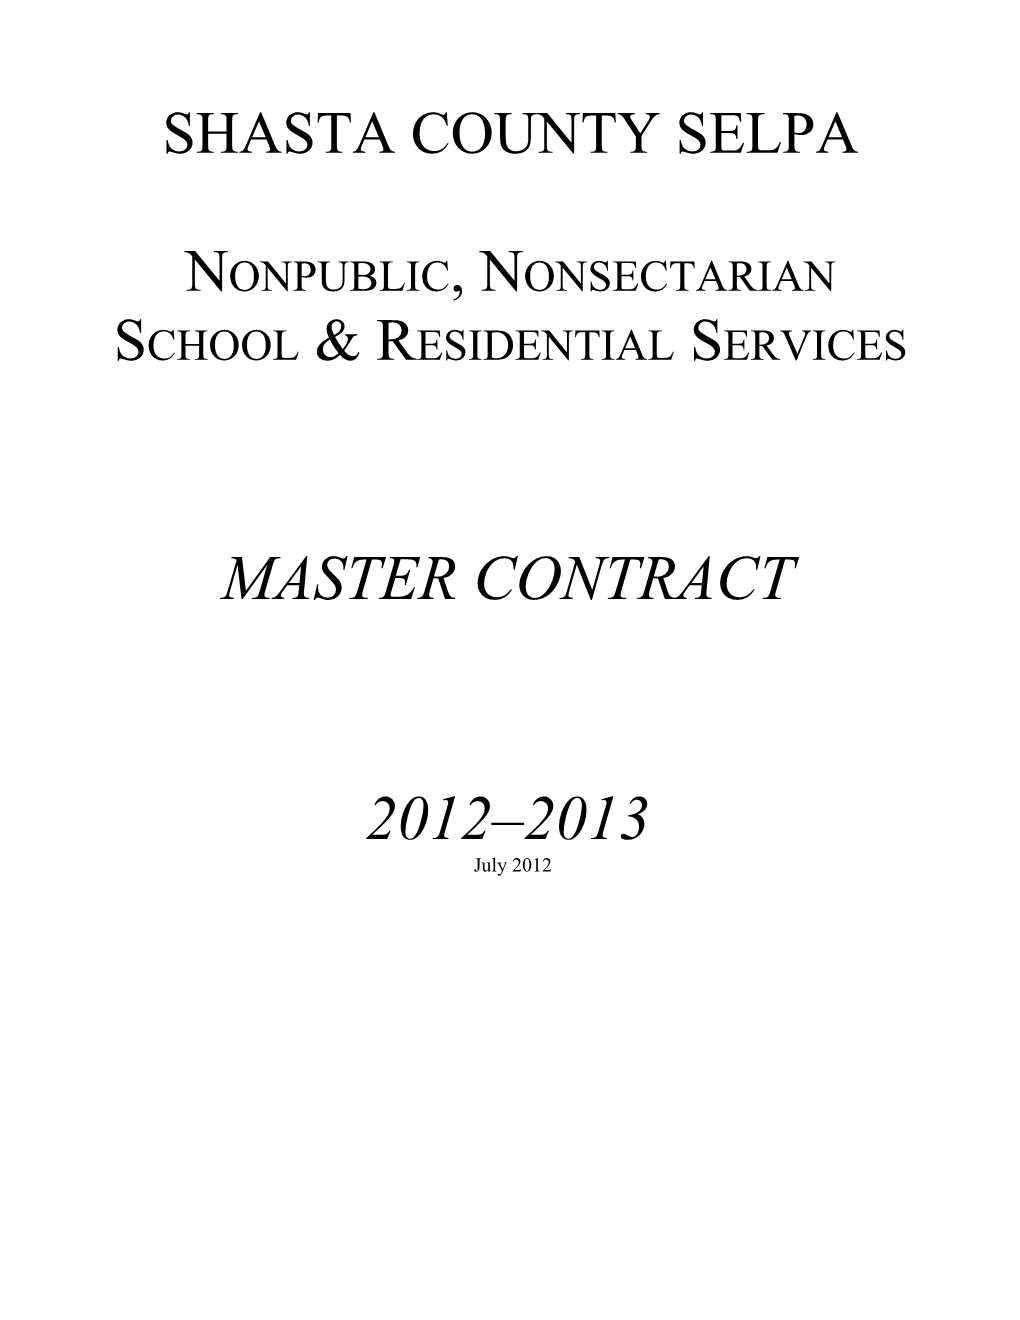 Nonpublic, Nonsectarian School & Residential Services